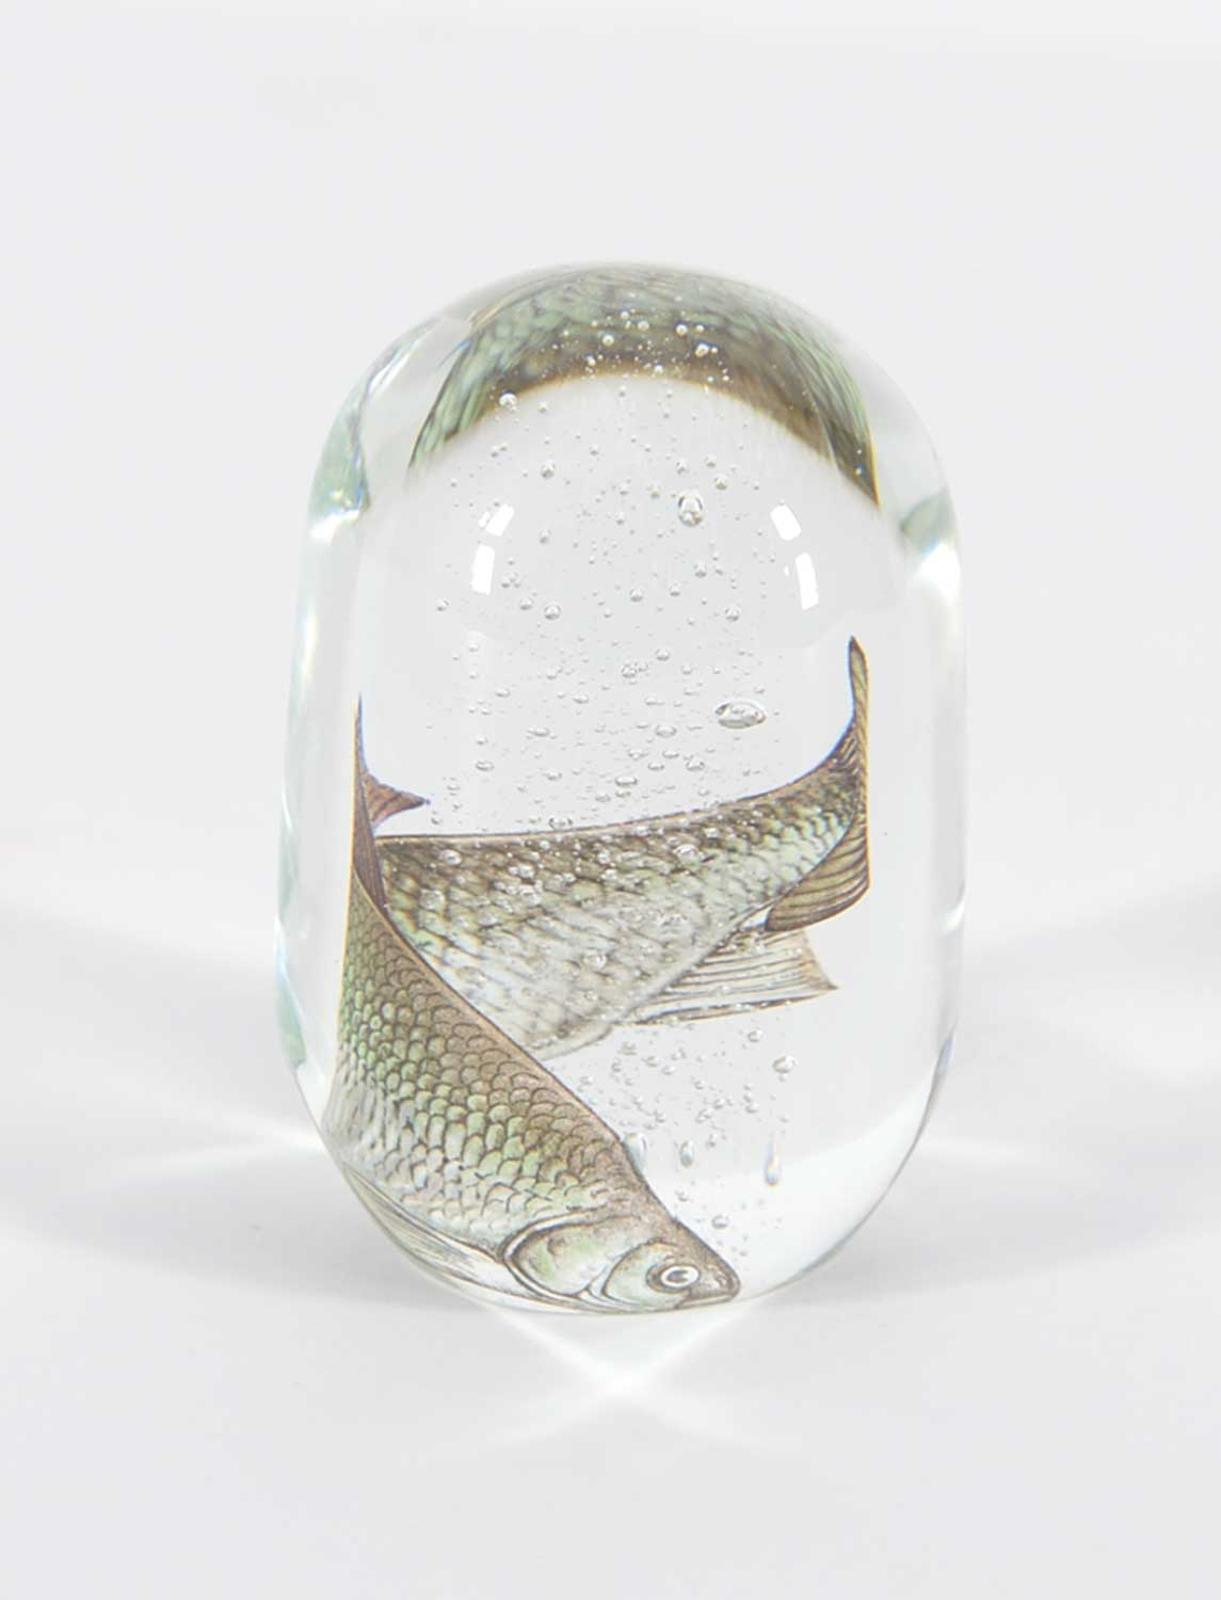 Toan Klein - Fish and Bubble Paperweight